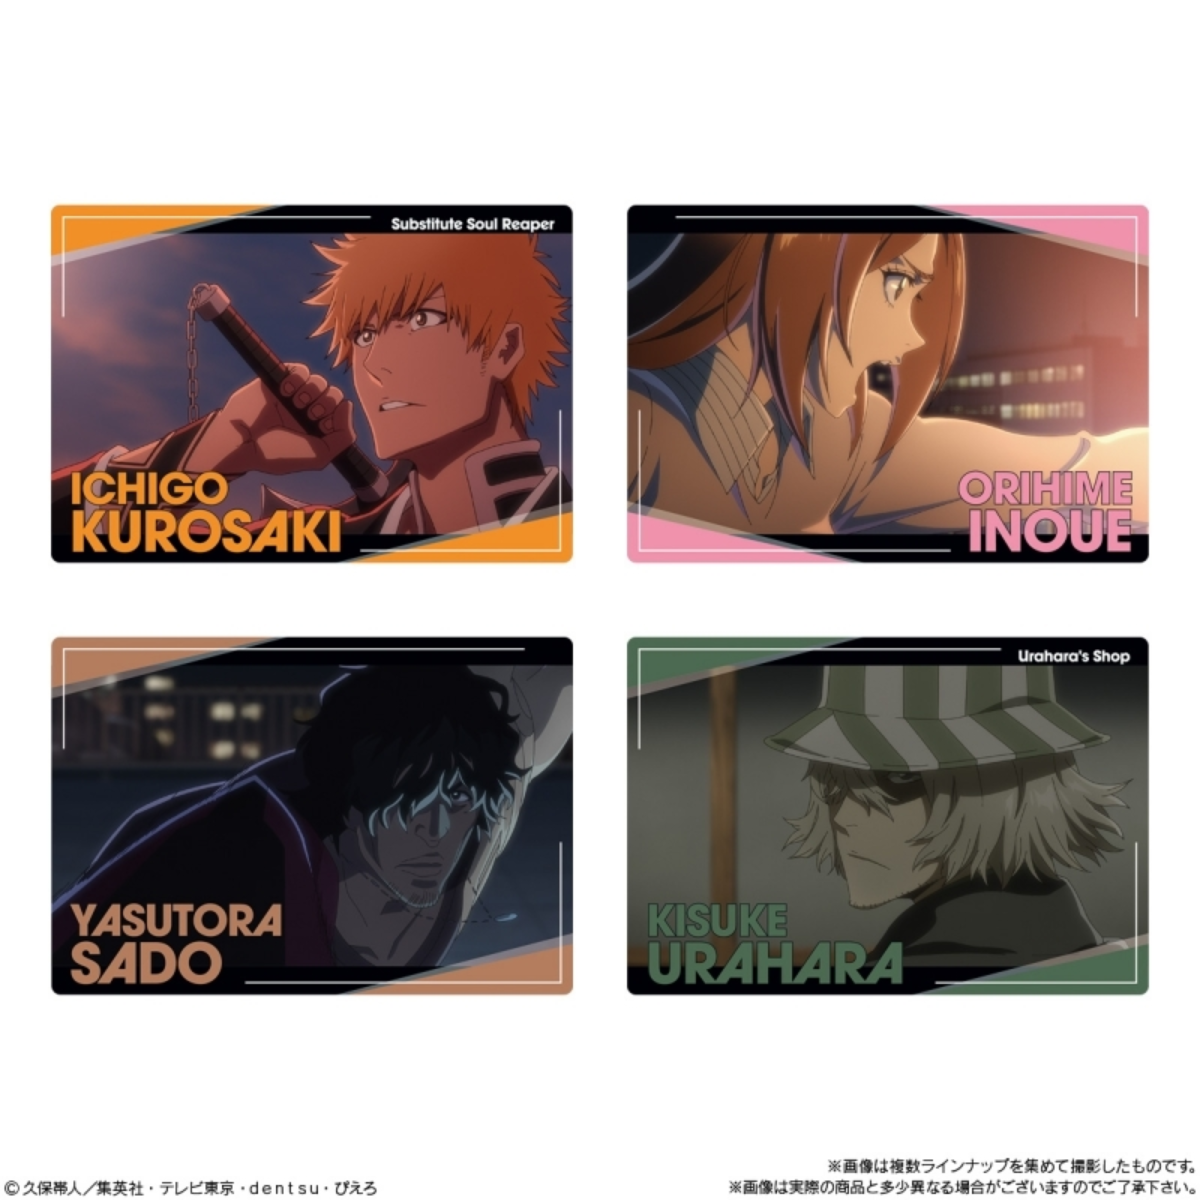 Bleach Metallic Card Collection Wafers 2-Single Pack (Random)-Bandai-Ace Cards &amp; Collectibles